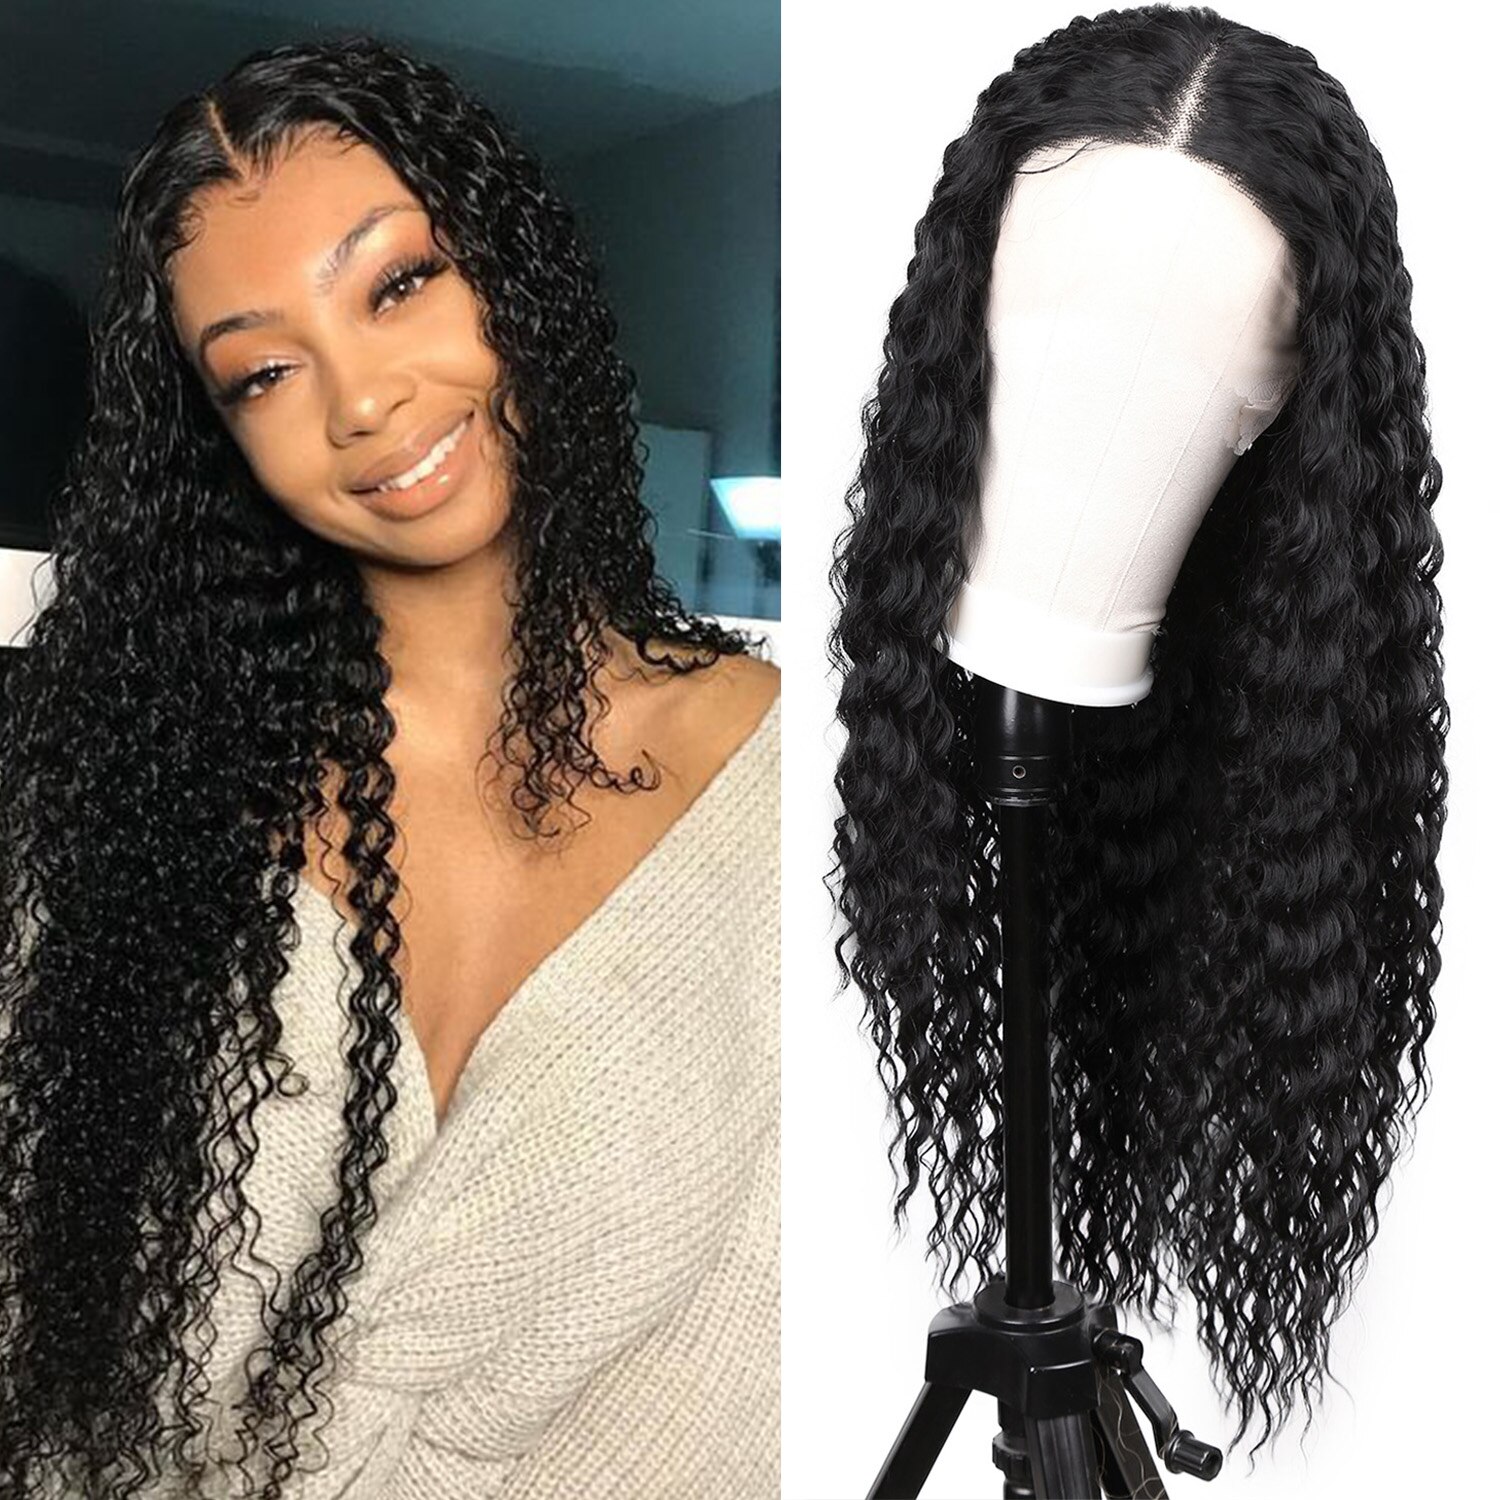 Hanne Kinky Curly Long Black Lace Front Wigs For B..